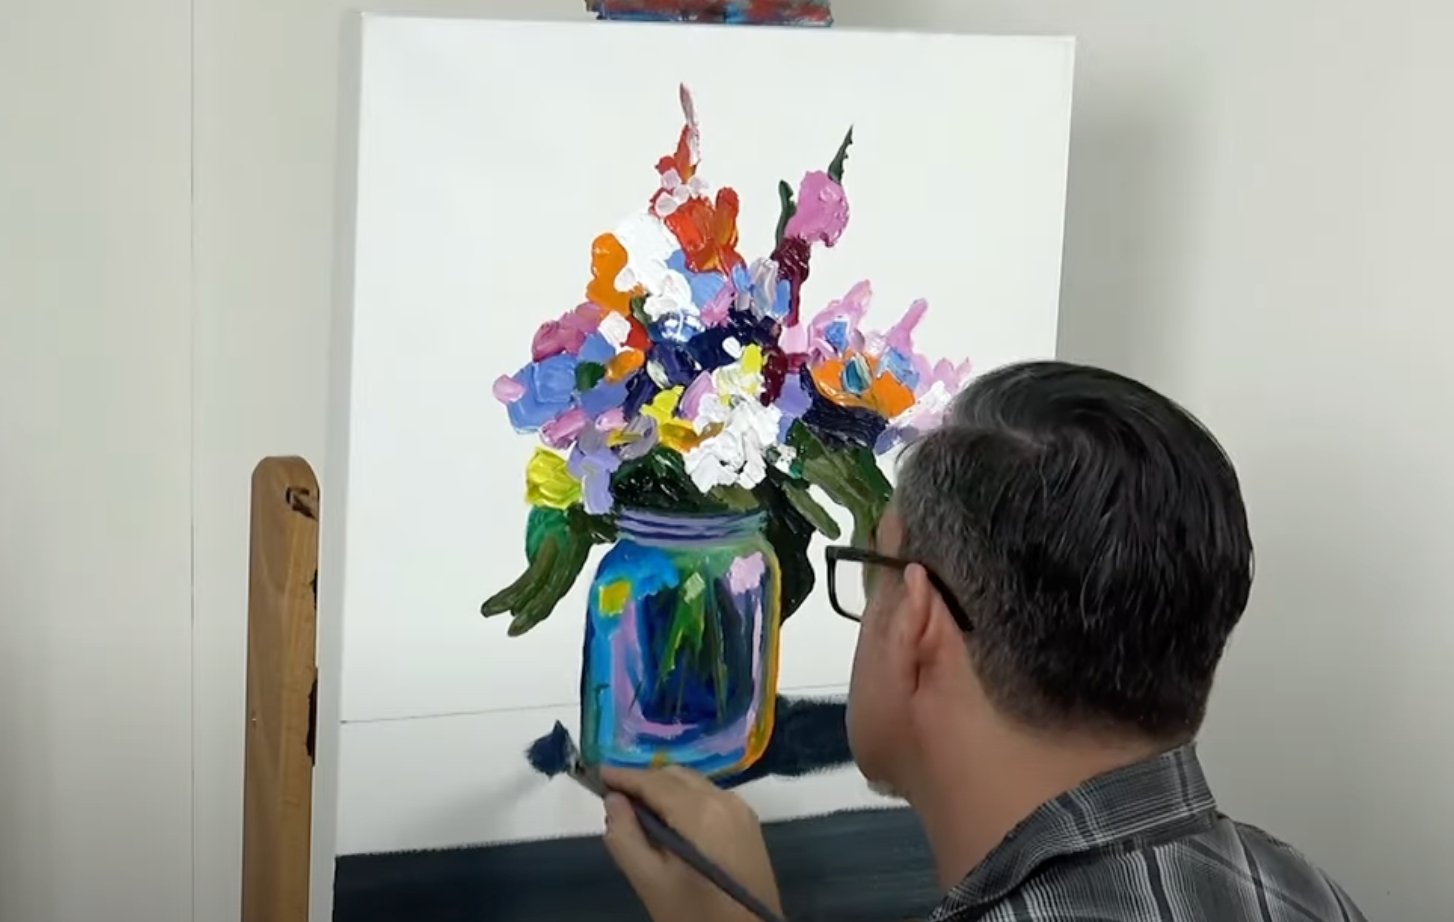 Flower Painting with Mont Marte Art Supplies - Handy Mandy Craft Store